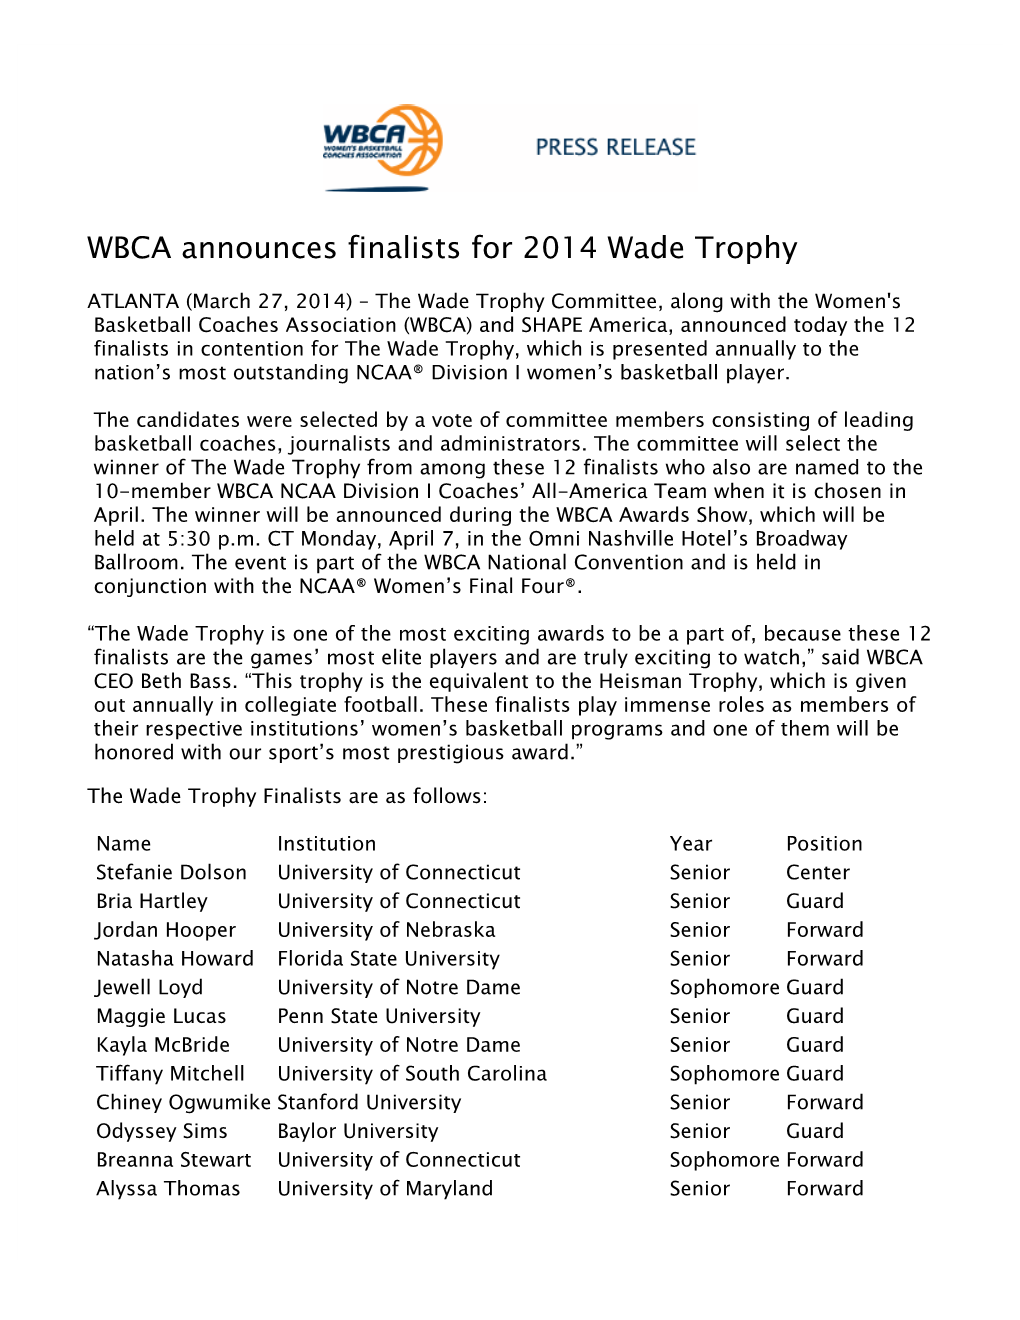 WBCA Announces Finalists for 2014 Wade Trophy 2013-14 032714